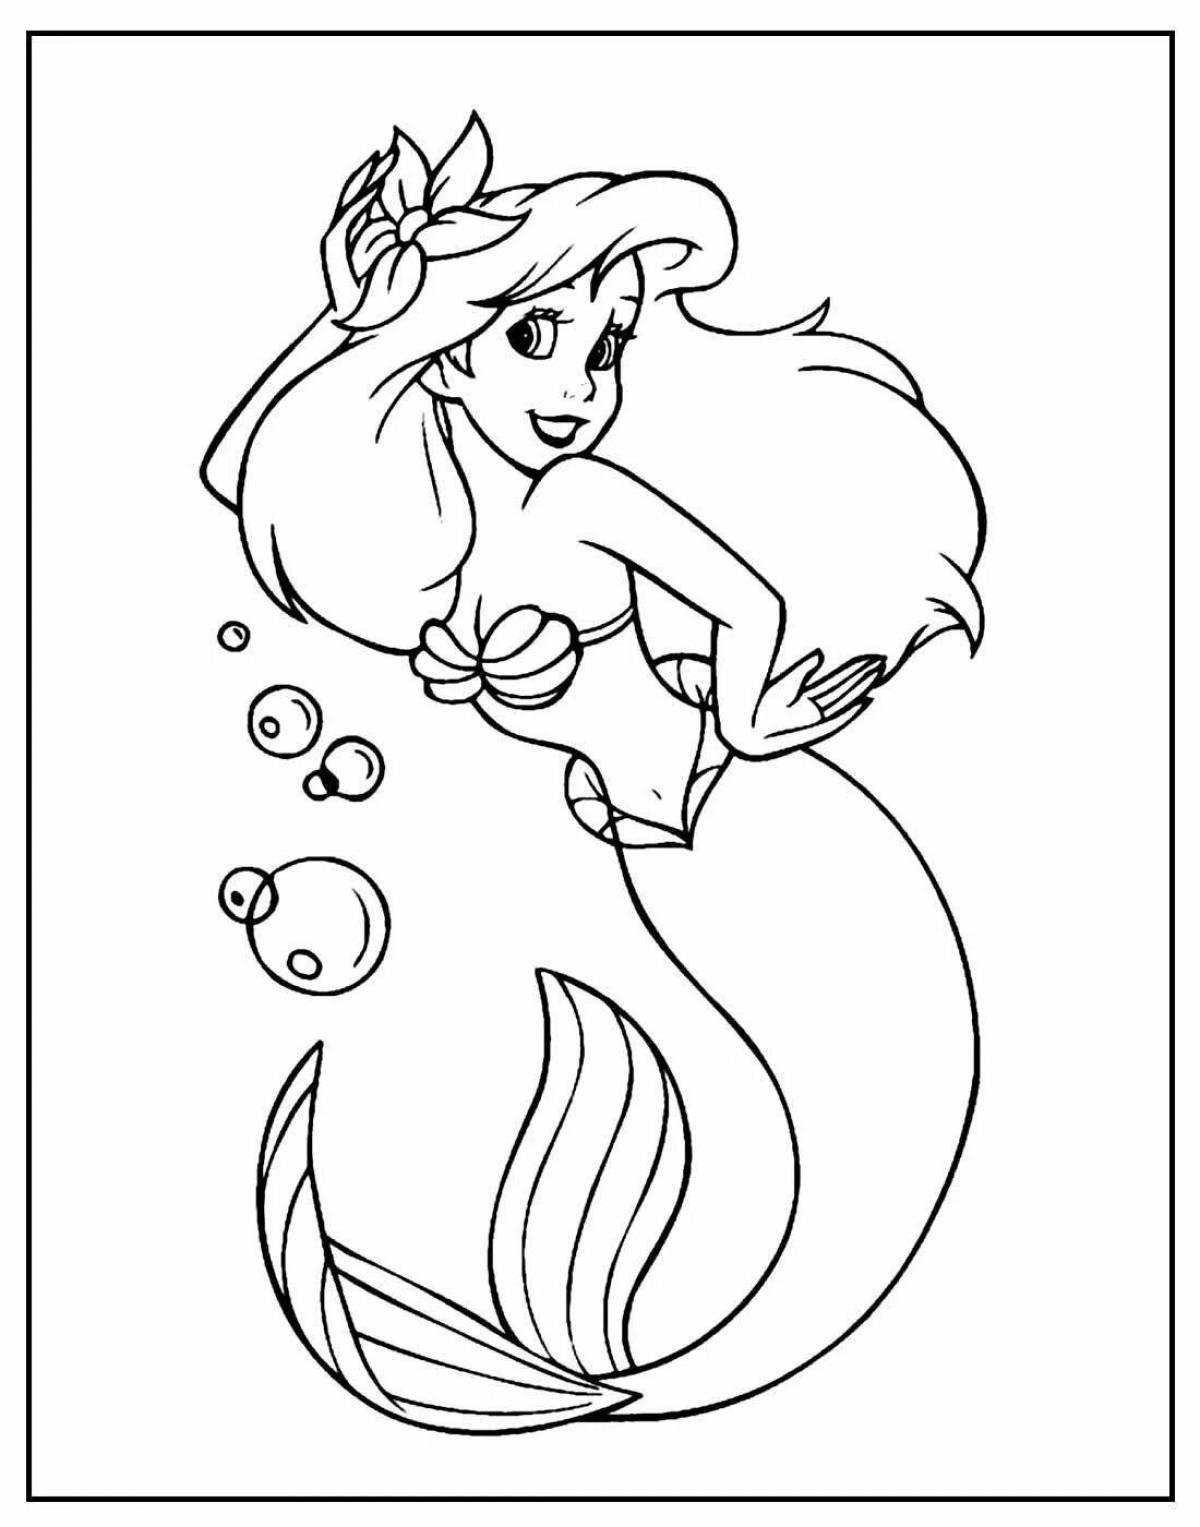 Ariel the little mermaid live coloring for kids